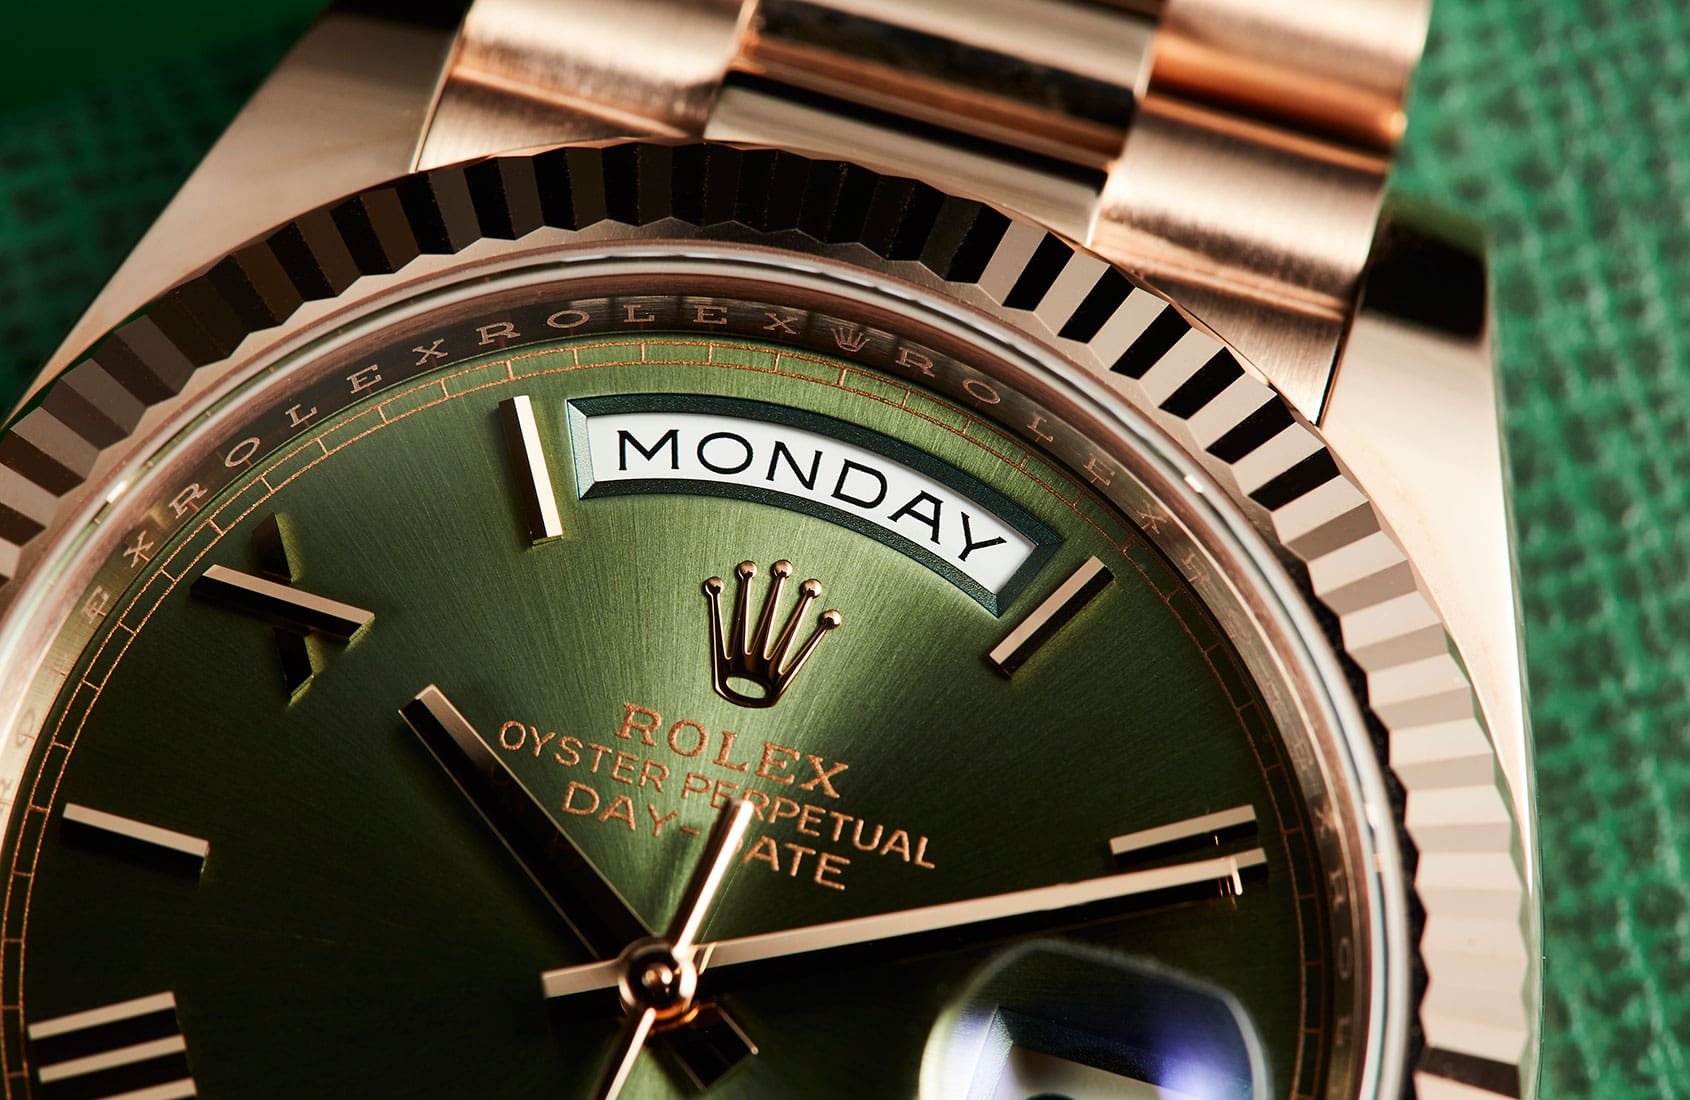 Everose and moss – is this still the hottest Rolex Day-Date on the market?